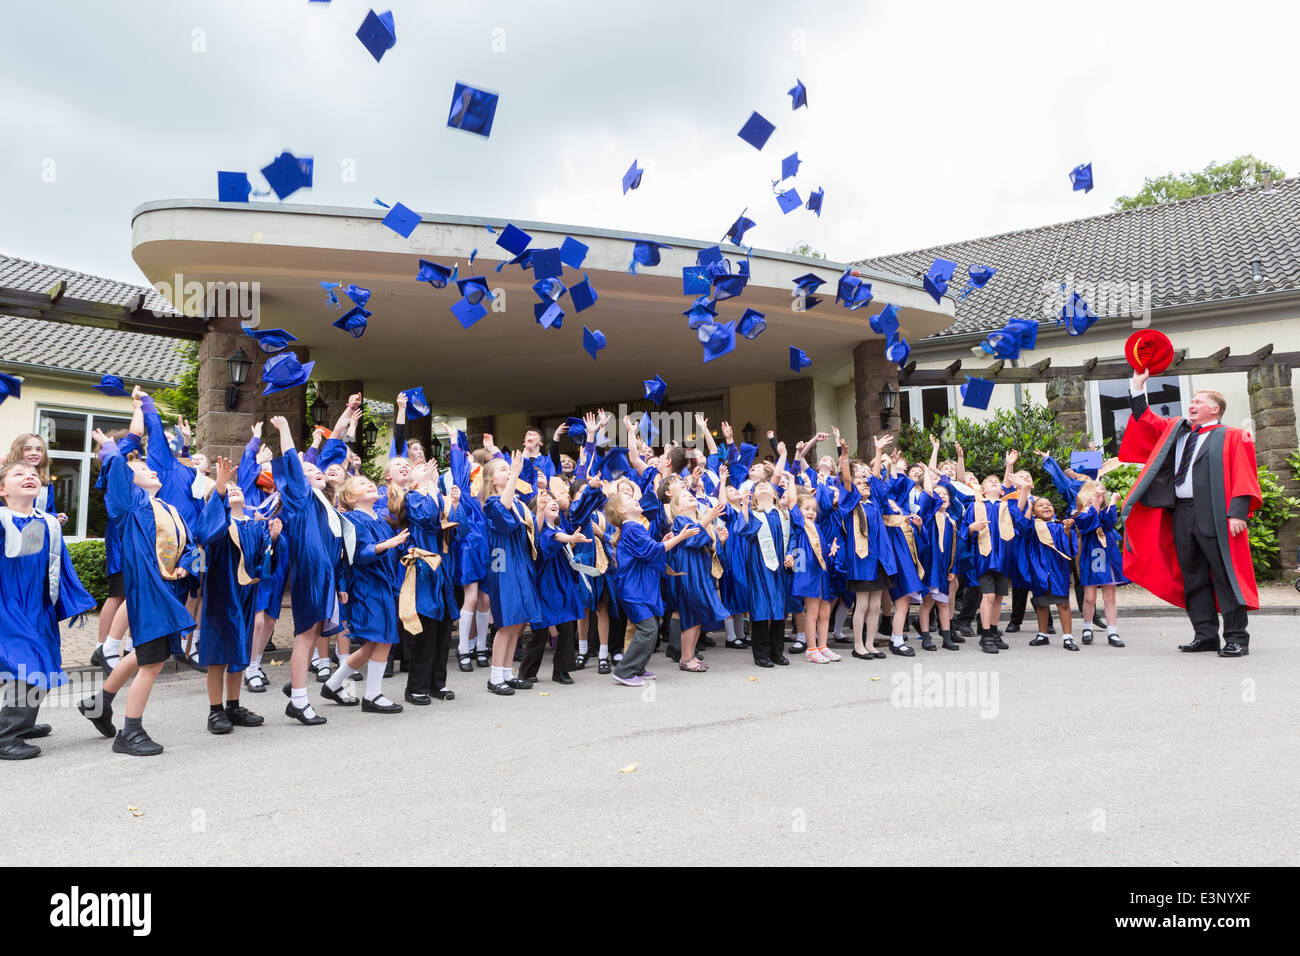 School children graduating from the UK's Children's University throw their mortar boards (hats) in the air in celebration Stock Photo